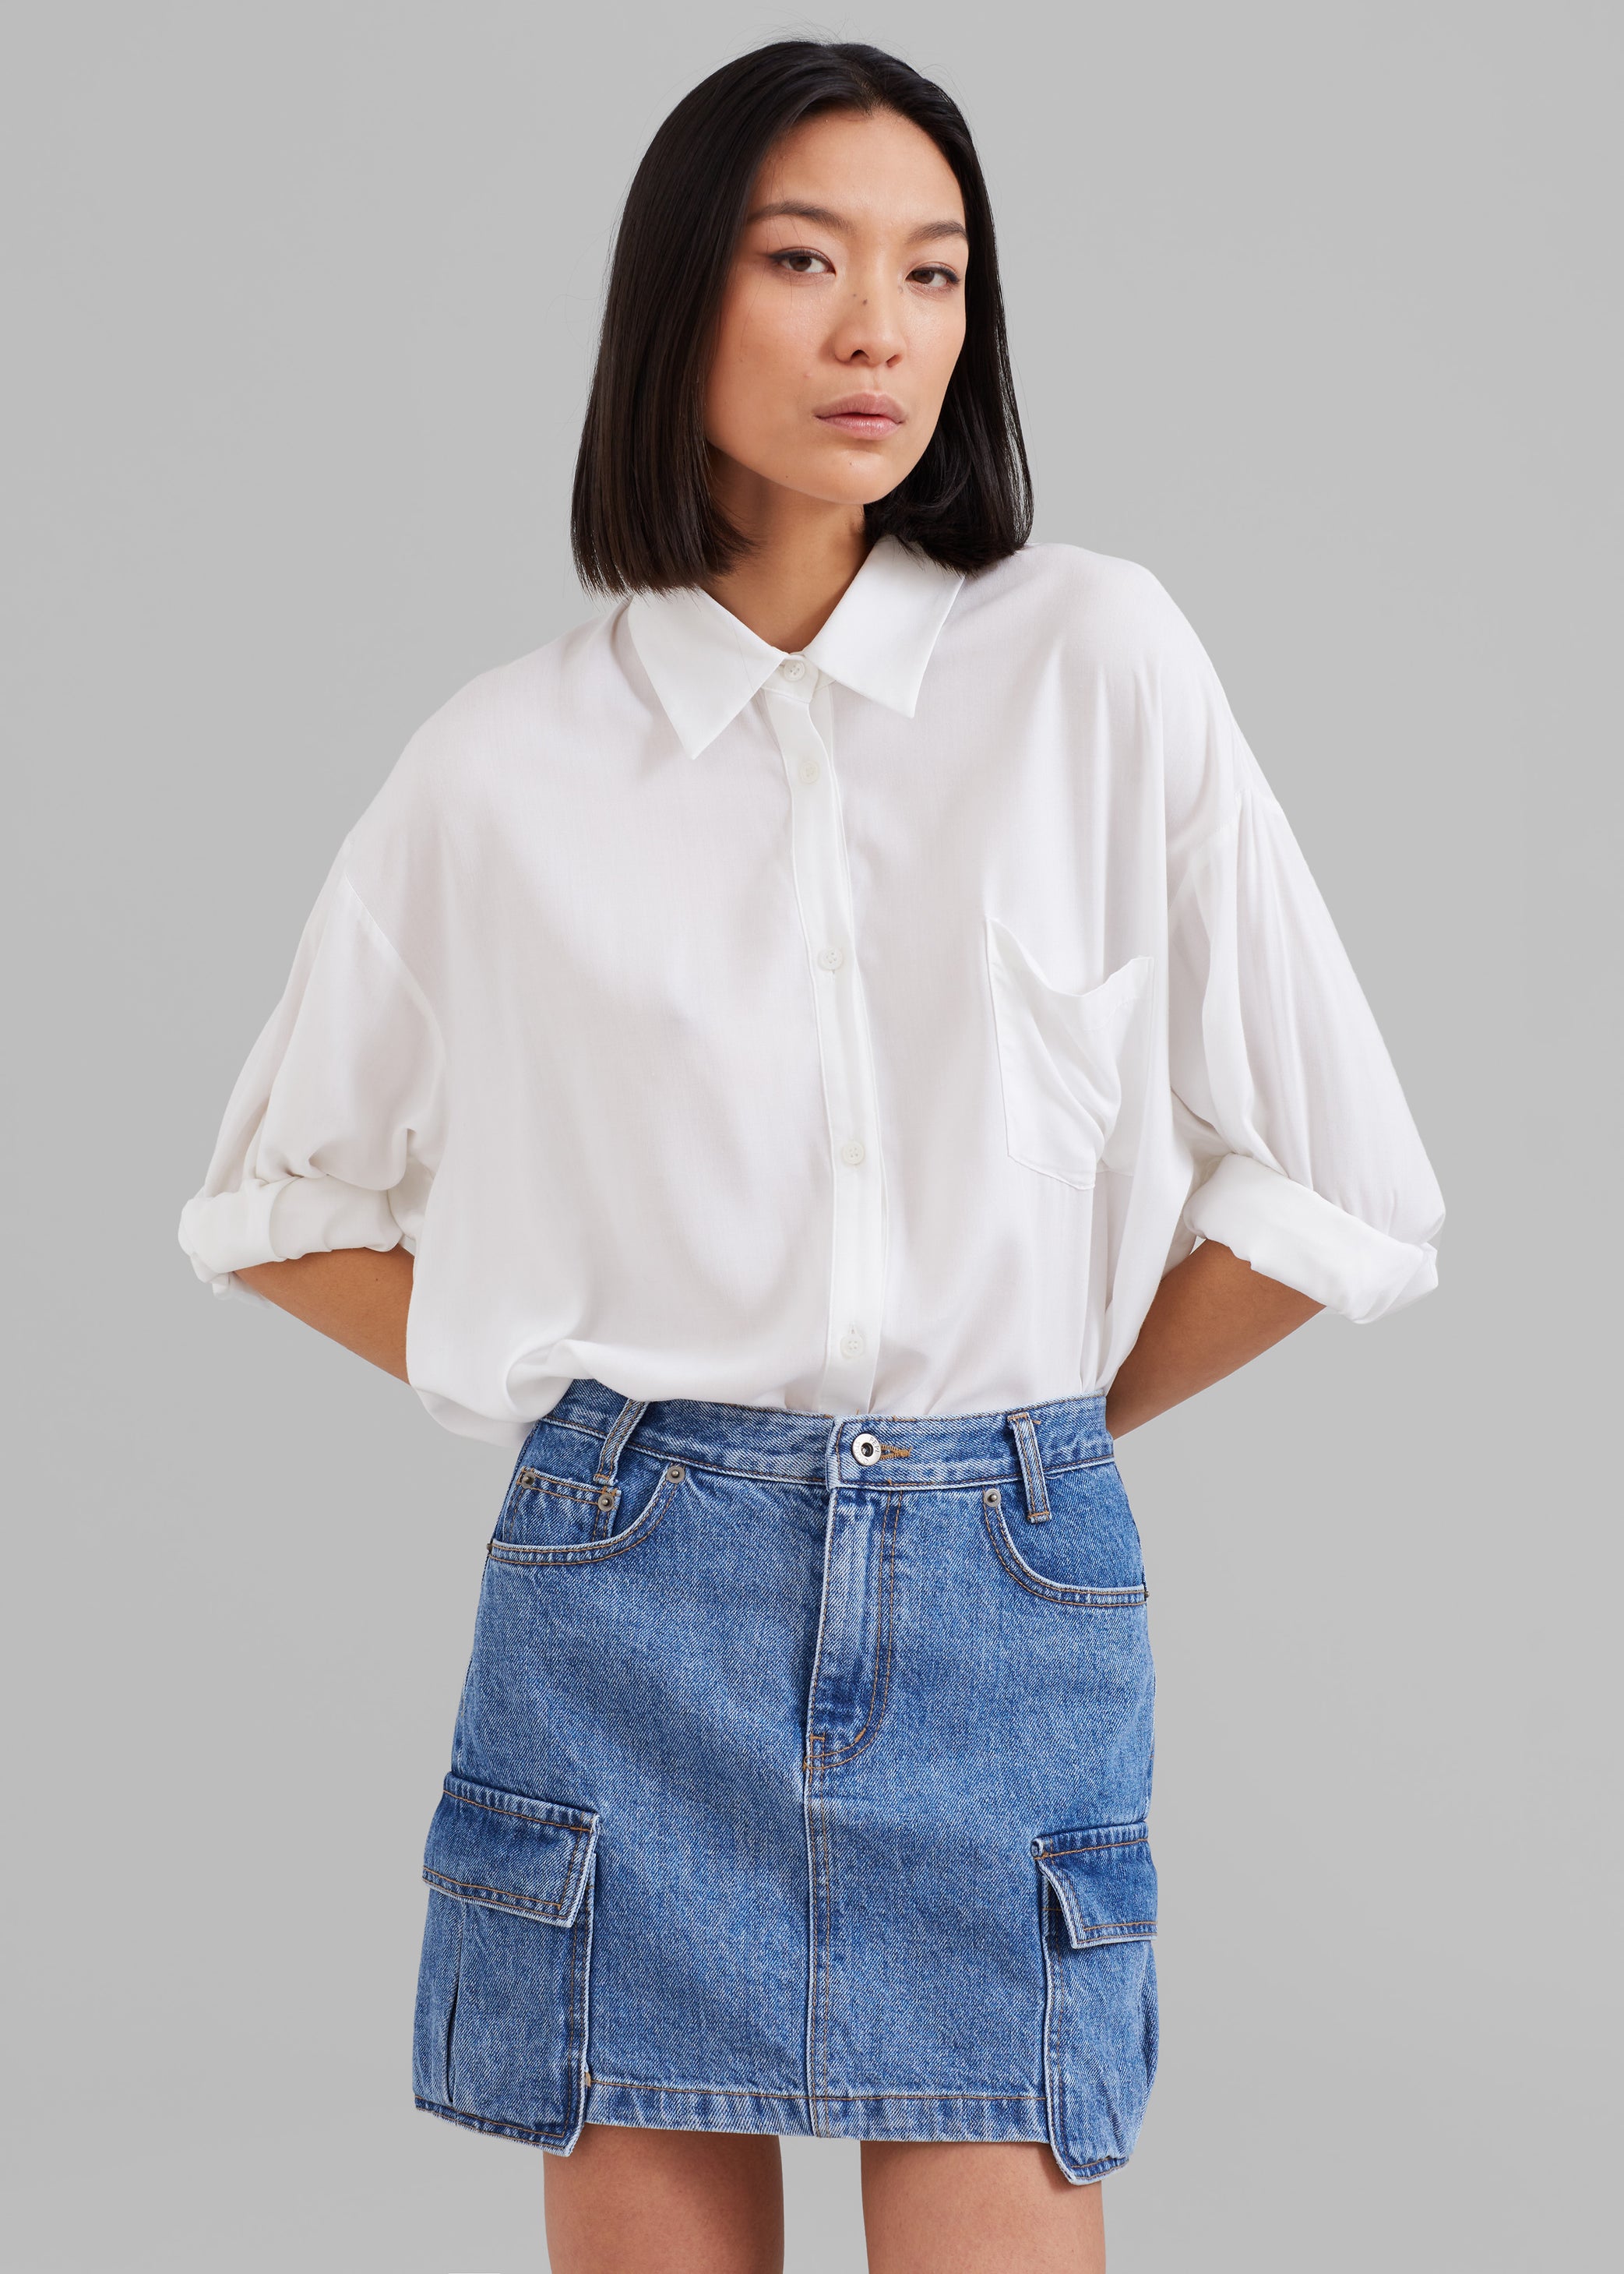 Frankie model wearing the Hanna silky oversized shirt paired with the Taylor denim cargo skirt.